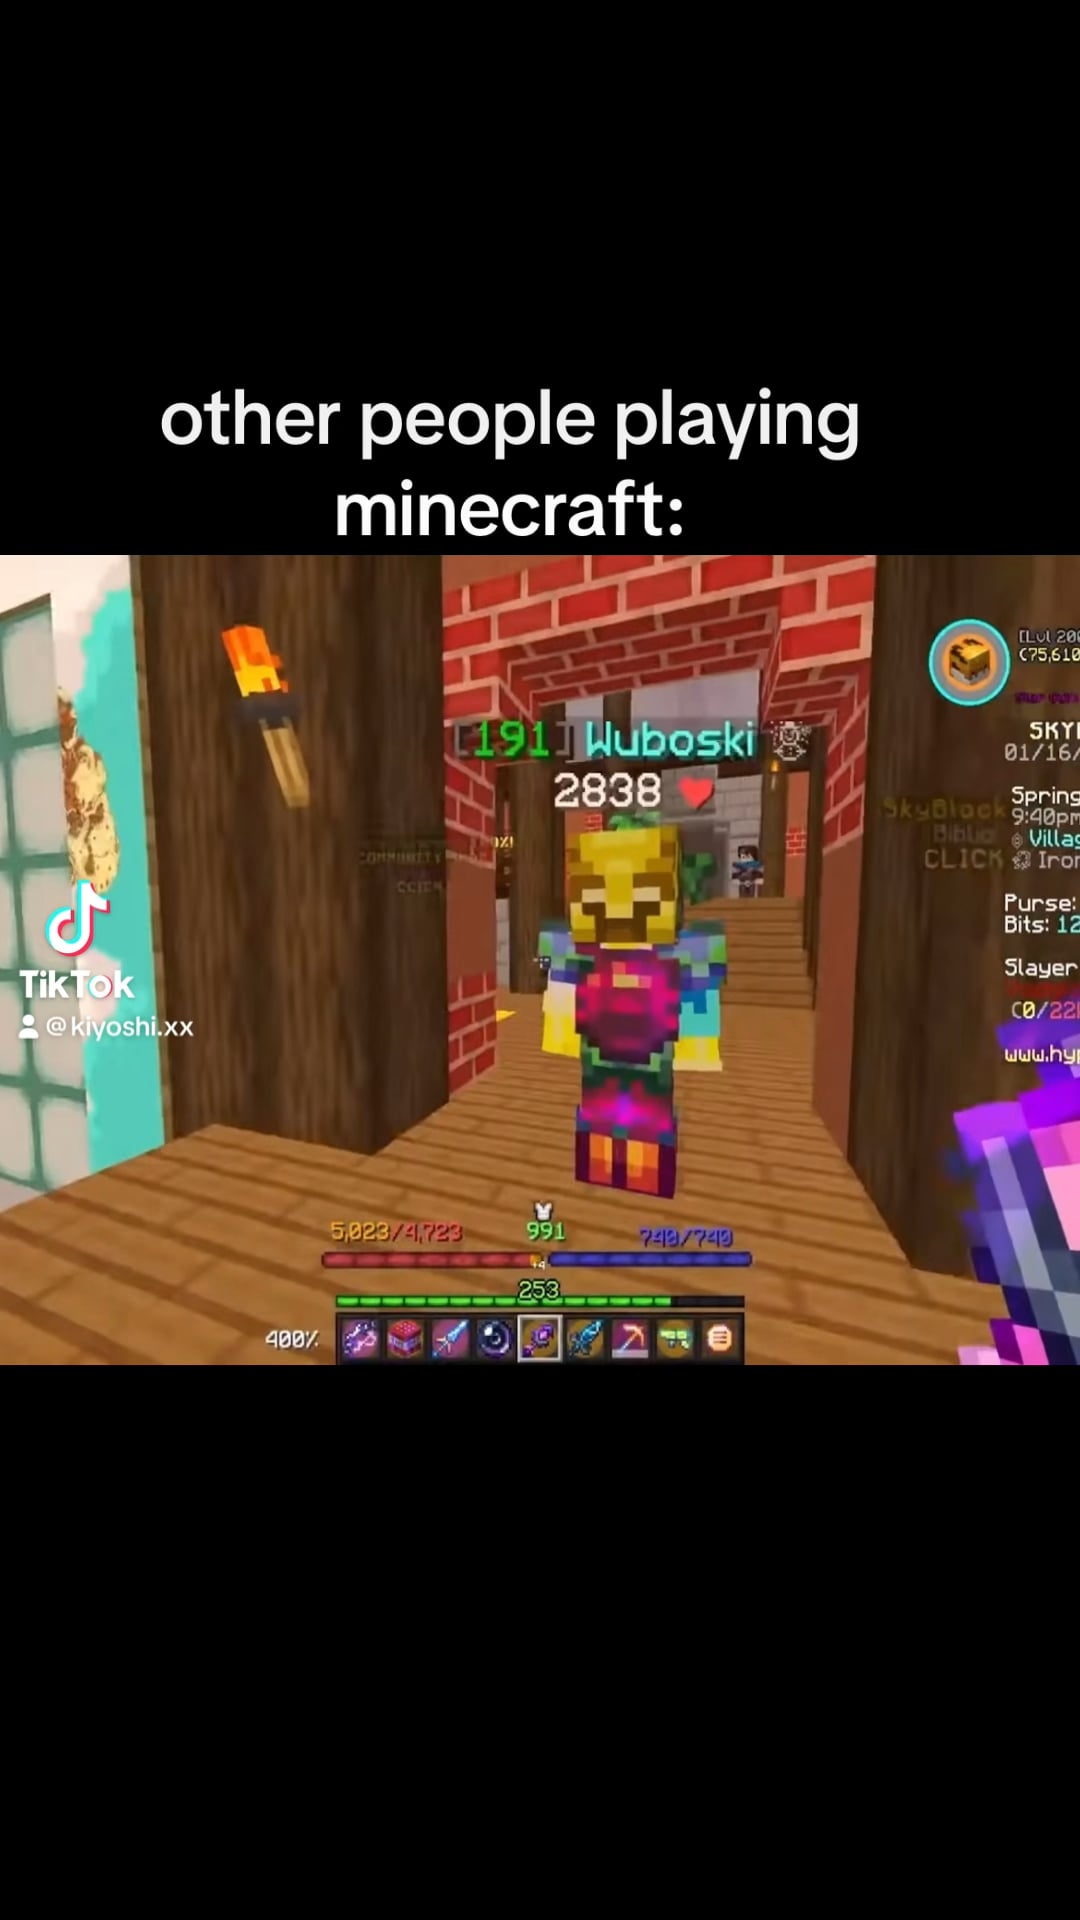 Minecraft Memes - "Too real"